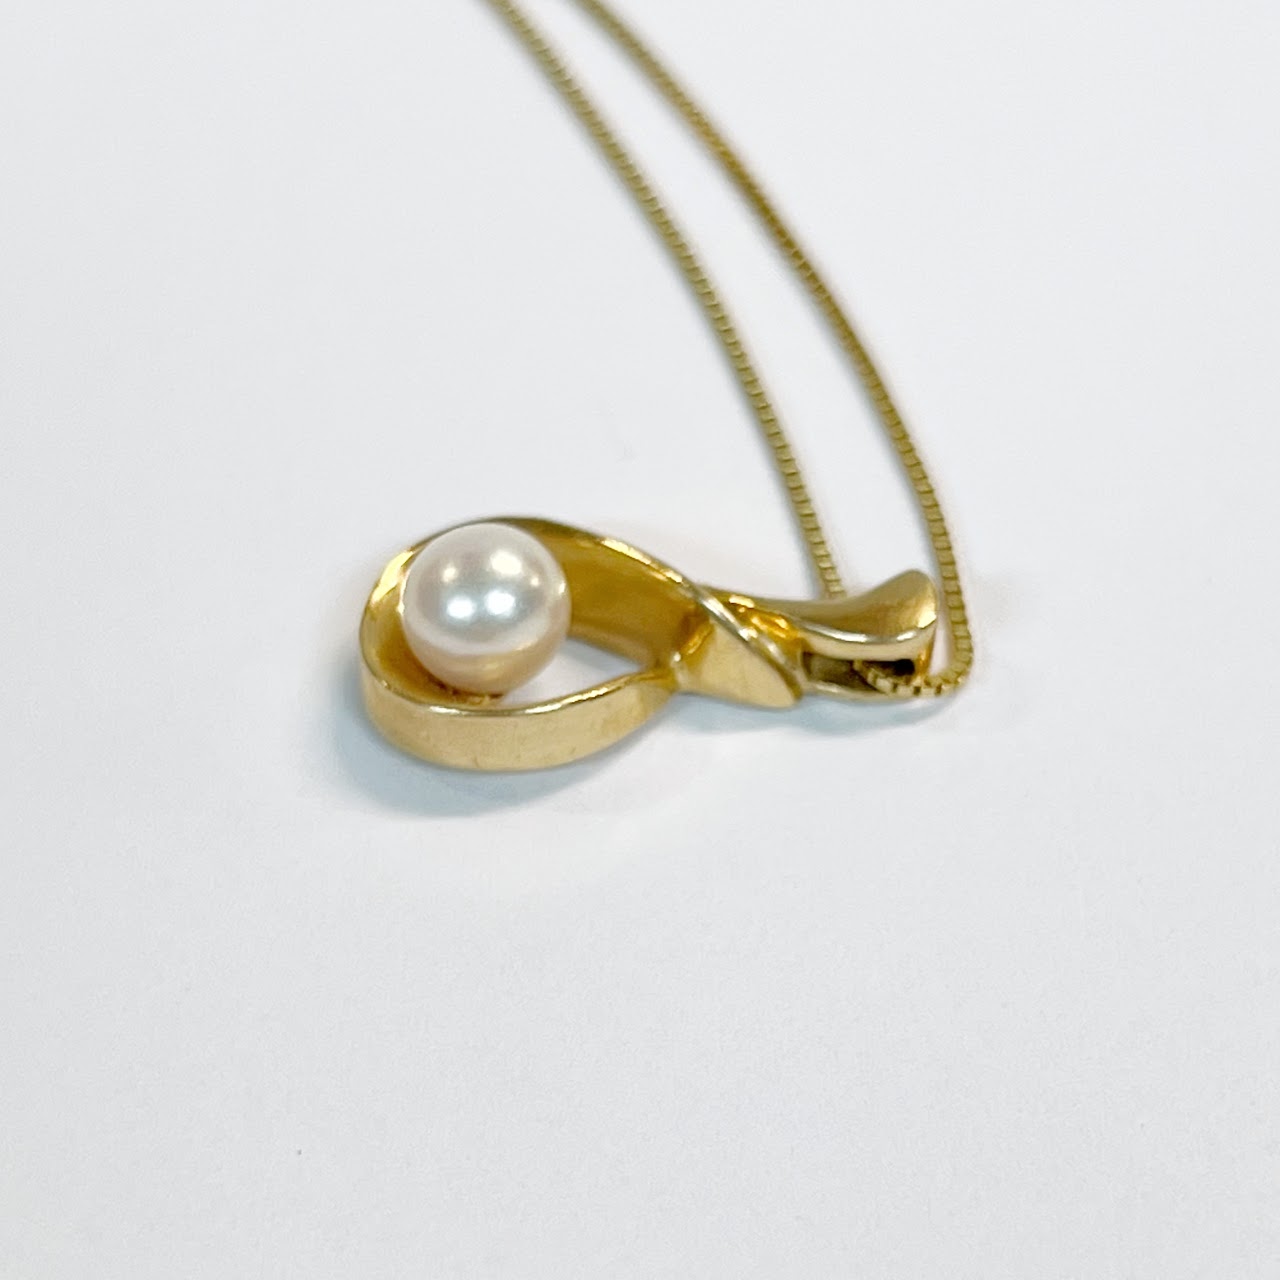 14K Gold and Pearl Bow Pendant Necklace